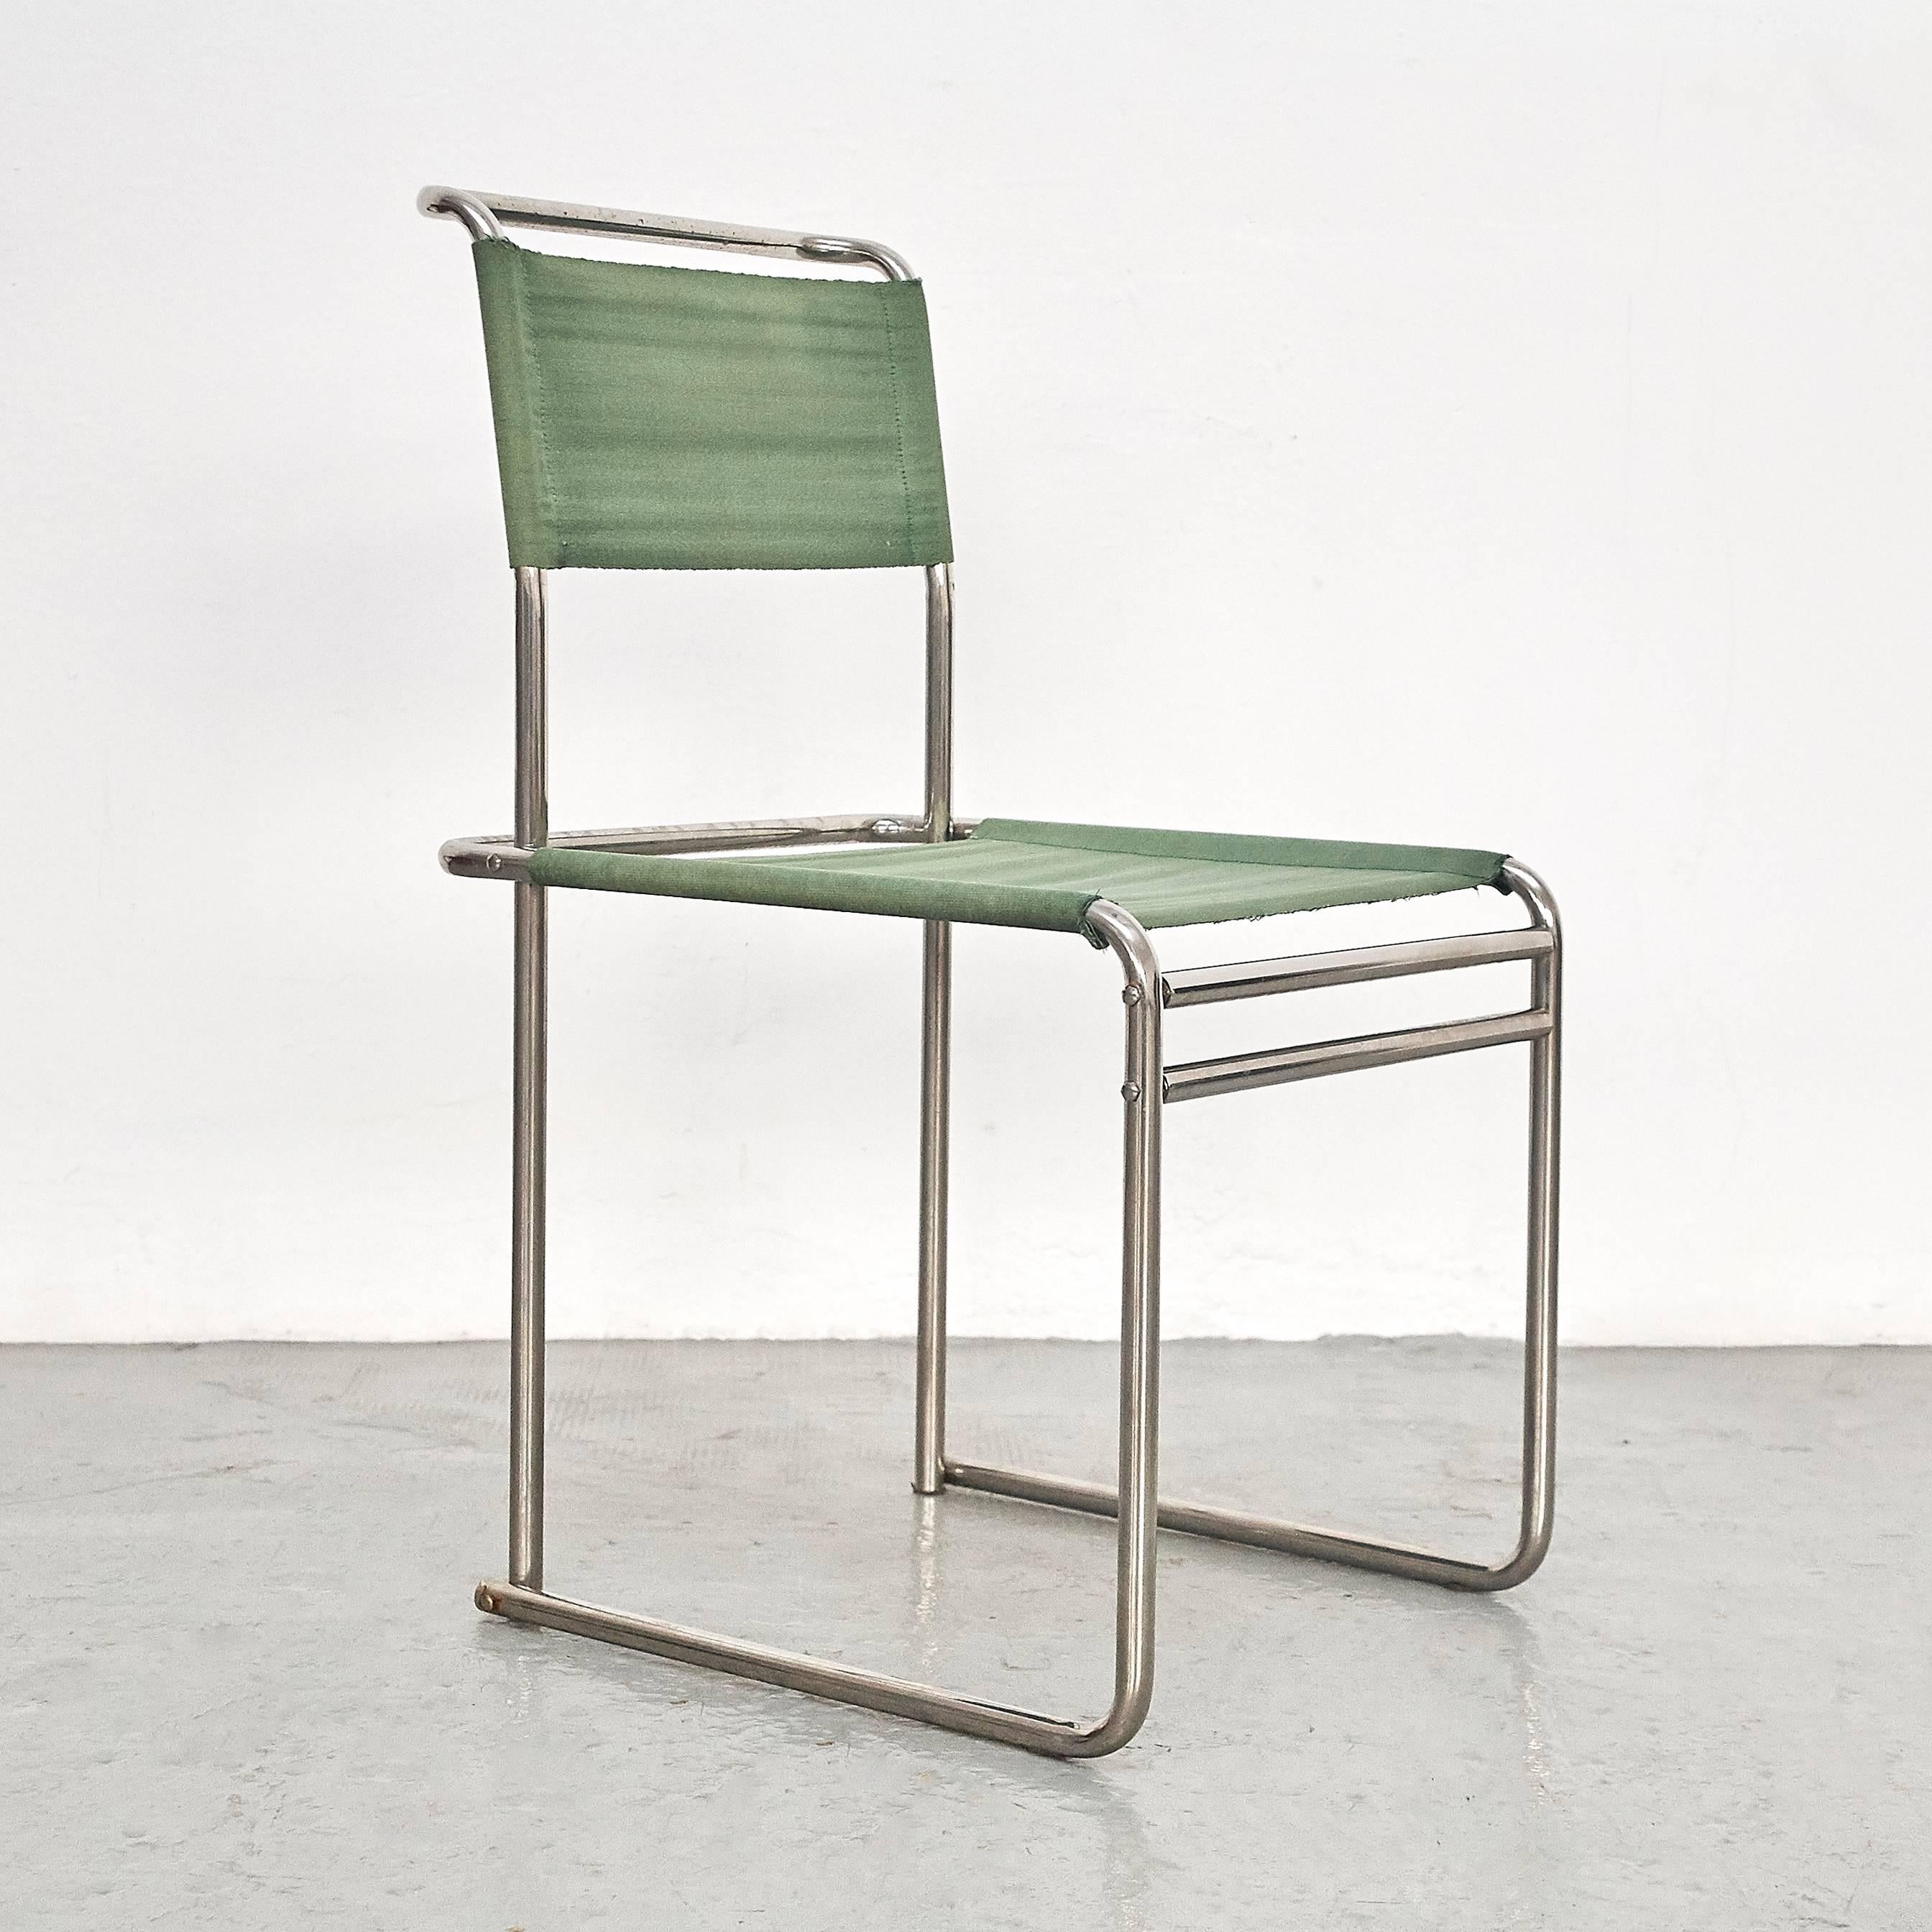 Chair designed by Marcel Breuer circa 1926 and manufactured by Tecta.

Tubular steel, fabric.

In good original condition, with minor wear consistent with age and use, preserving a beautiful patina. 

Marcel Lajos Breuer (1902–1981), was a